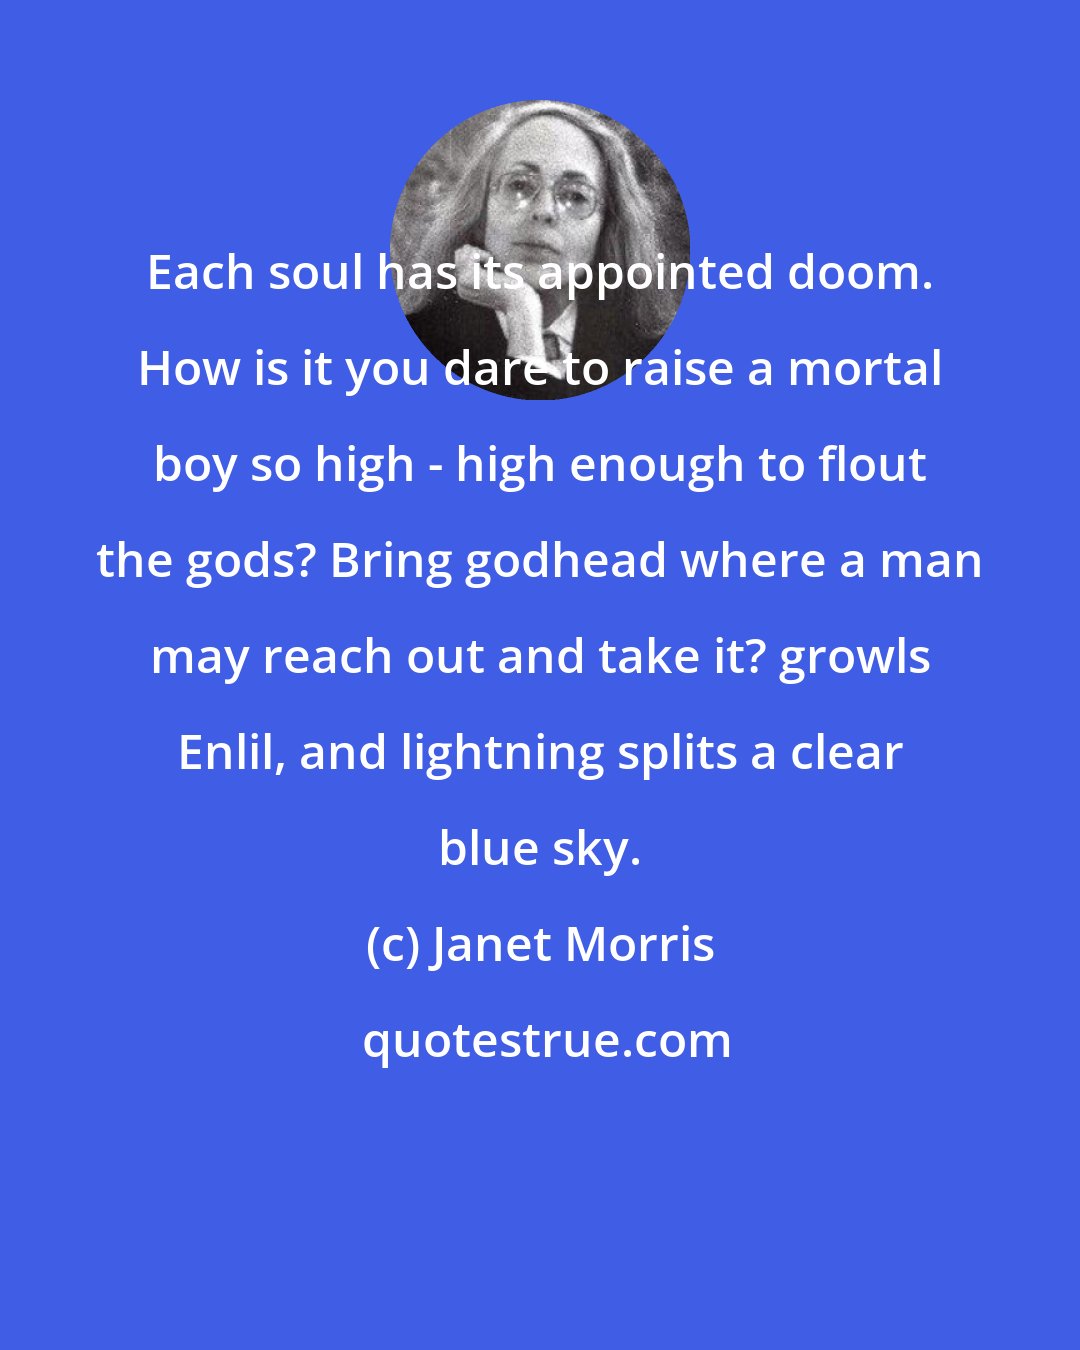 Janet Morris: Each soul has its appointed doom. How is it you dare to raise a mortal boy so high - high enough to flout the gods? Bring godhead where a man may reach out and take it? growls Enlil, and lightning splits a clear blue sky.